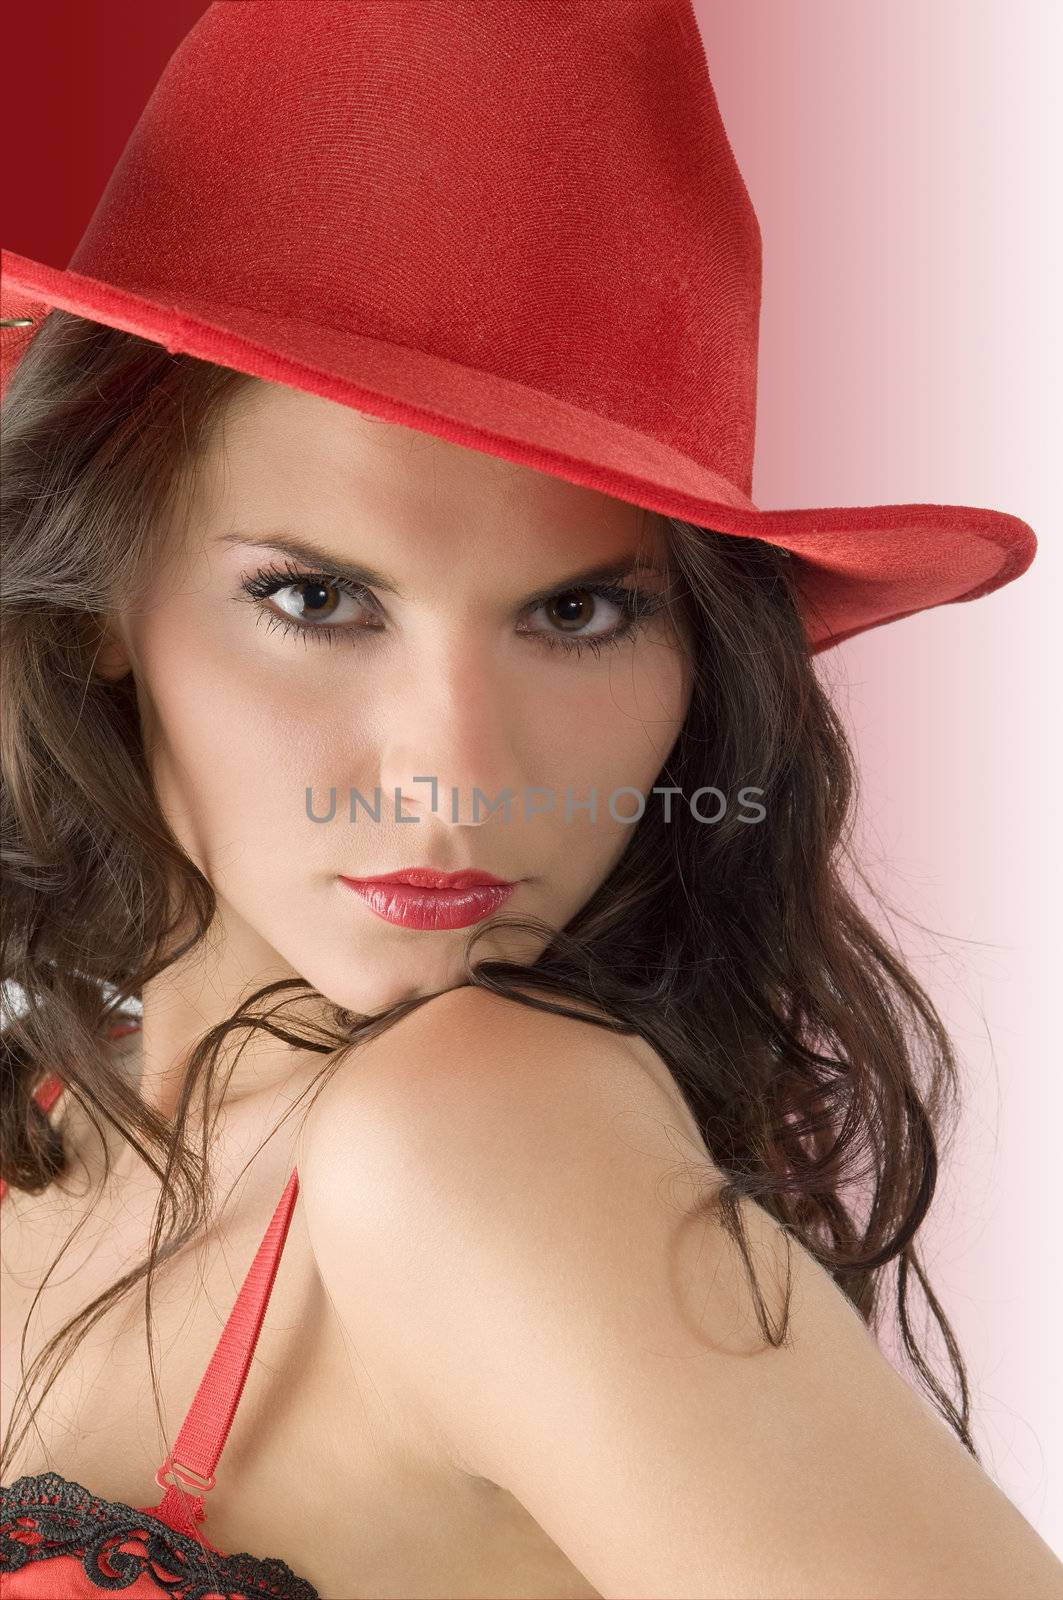 nice portrait of a cute girl with black hair and red hat